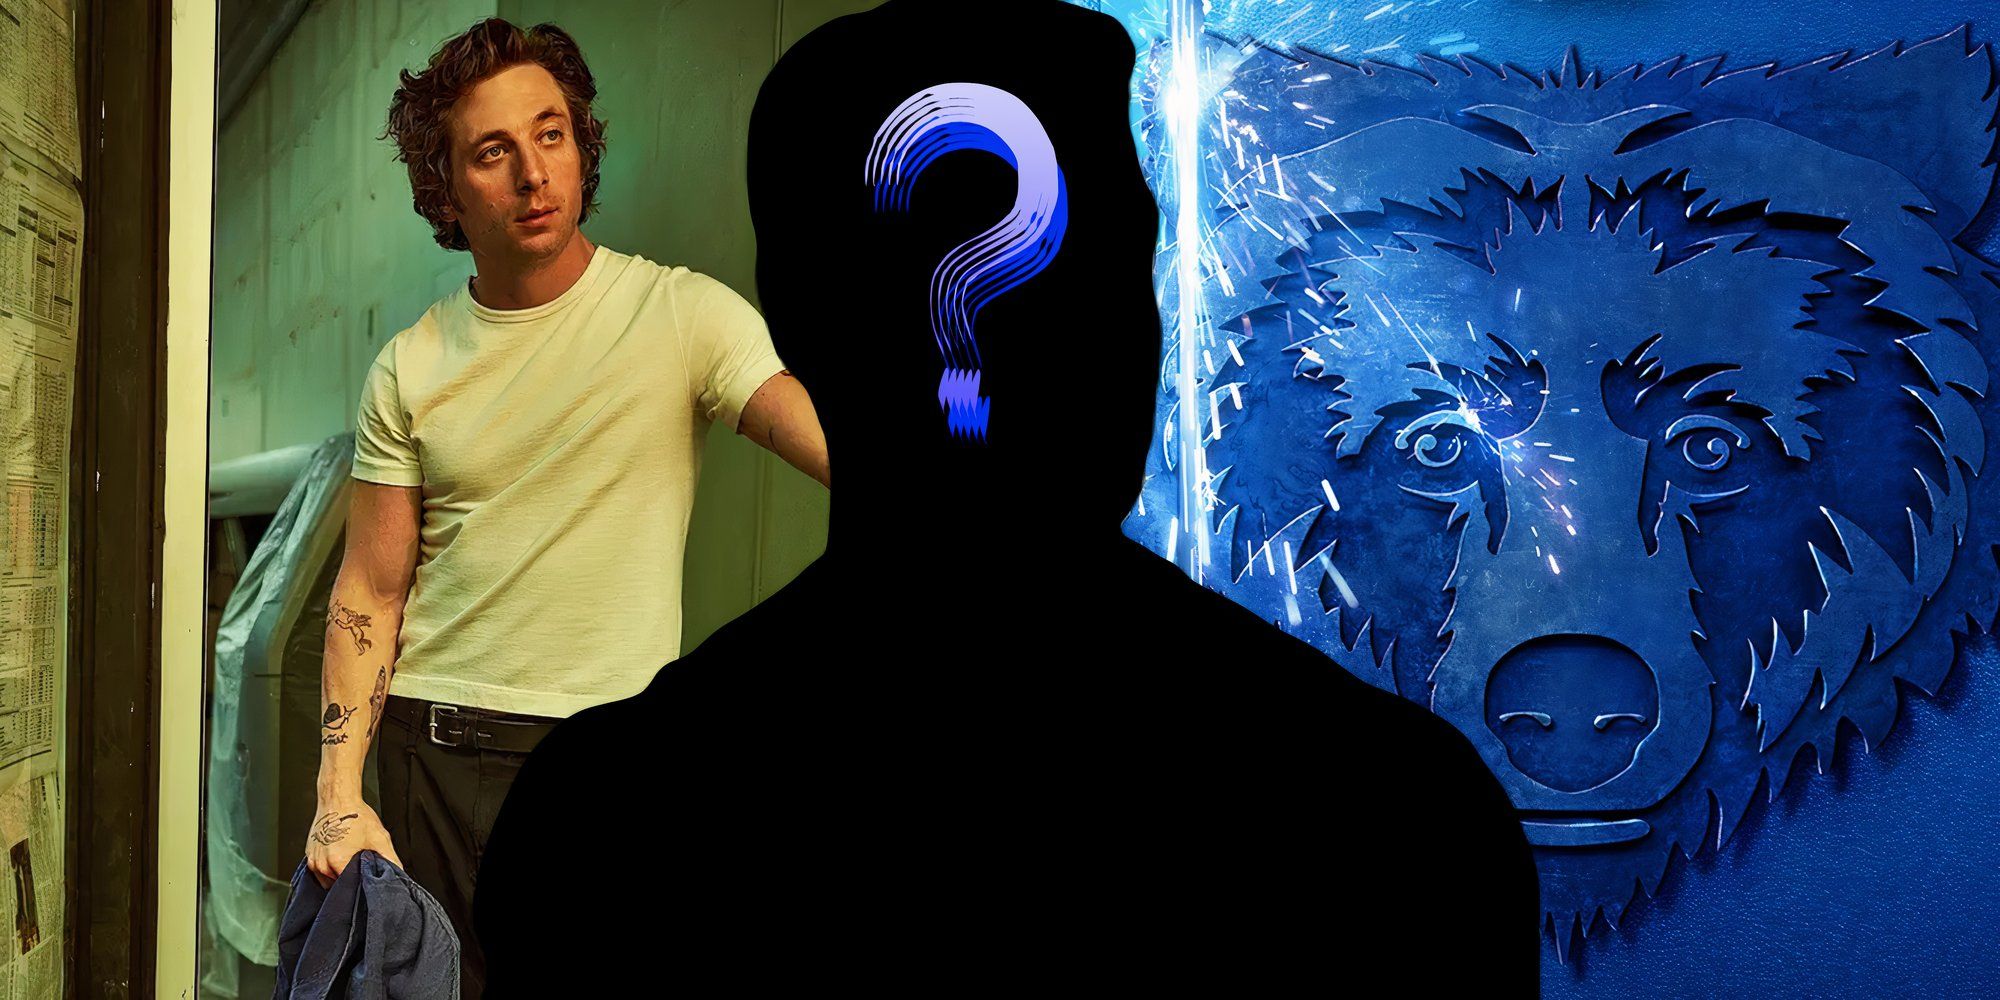 A blacked-out image of John Cena as Sammy Fak in The Bear season 3 next to Jeremy Allen White as Carmy and the poster for the show